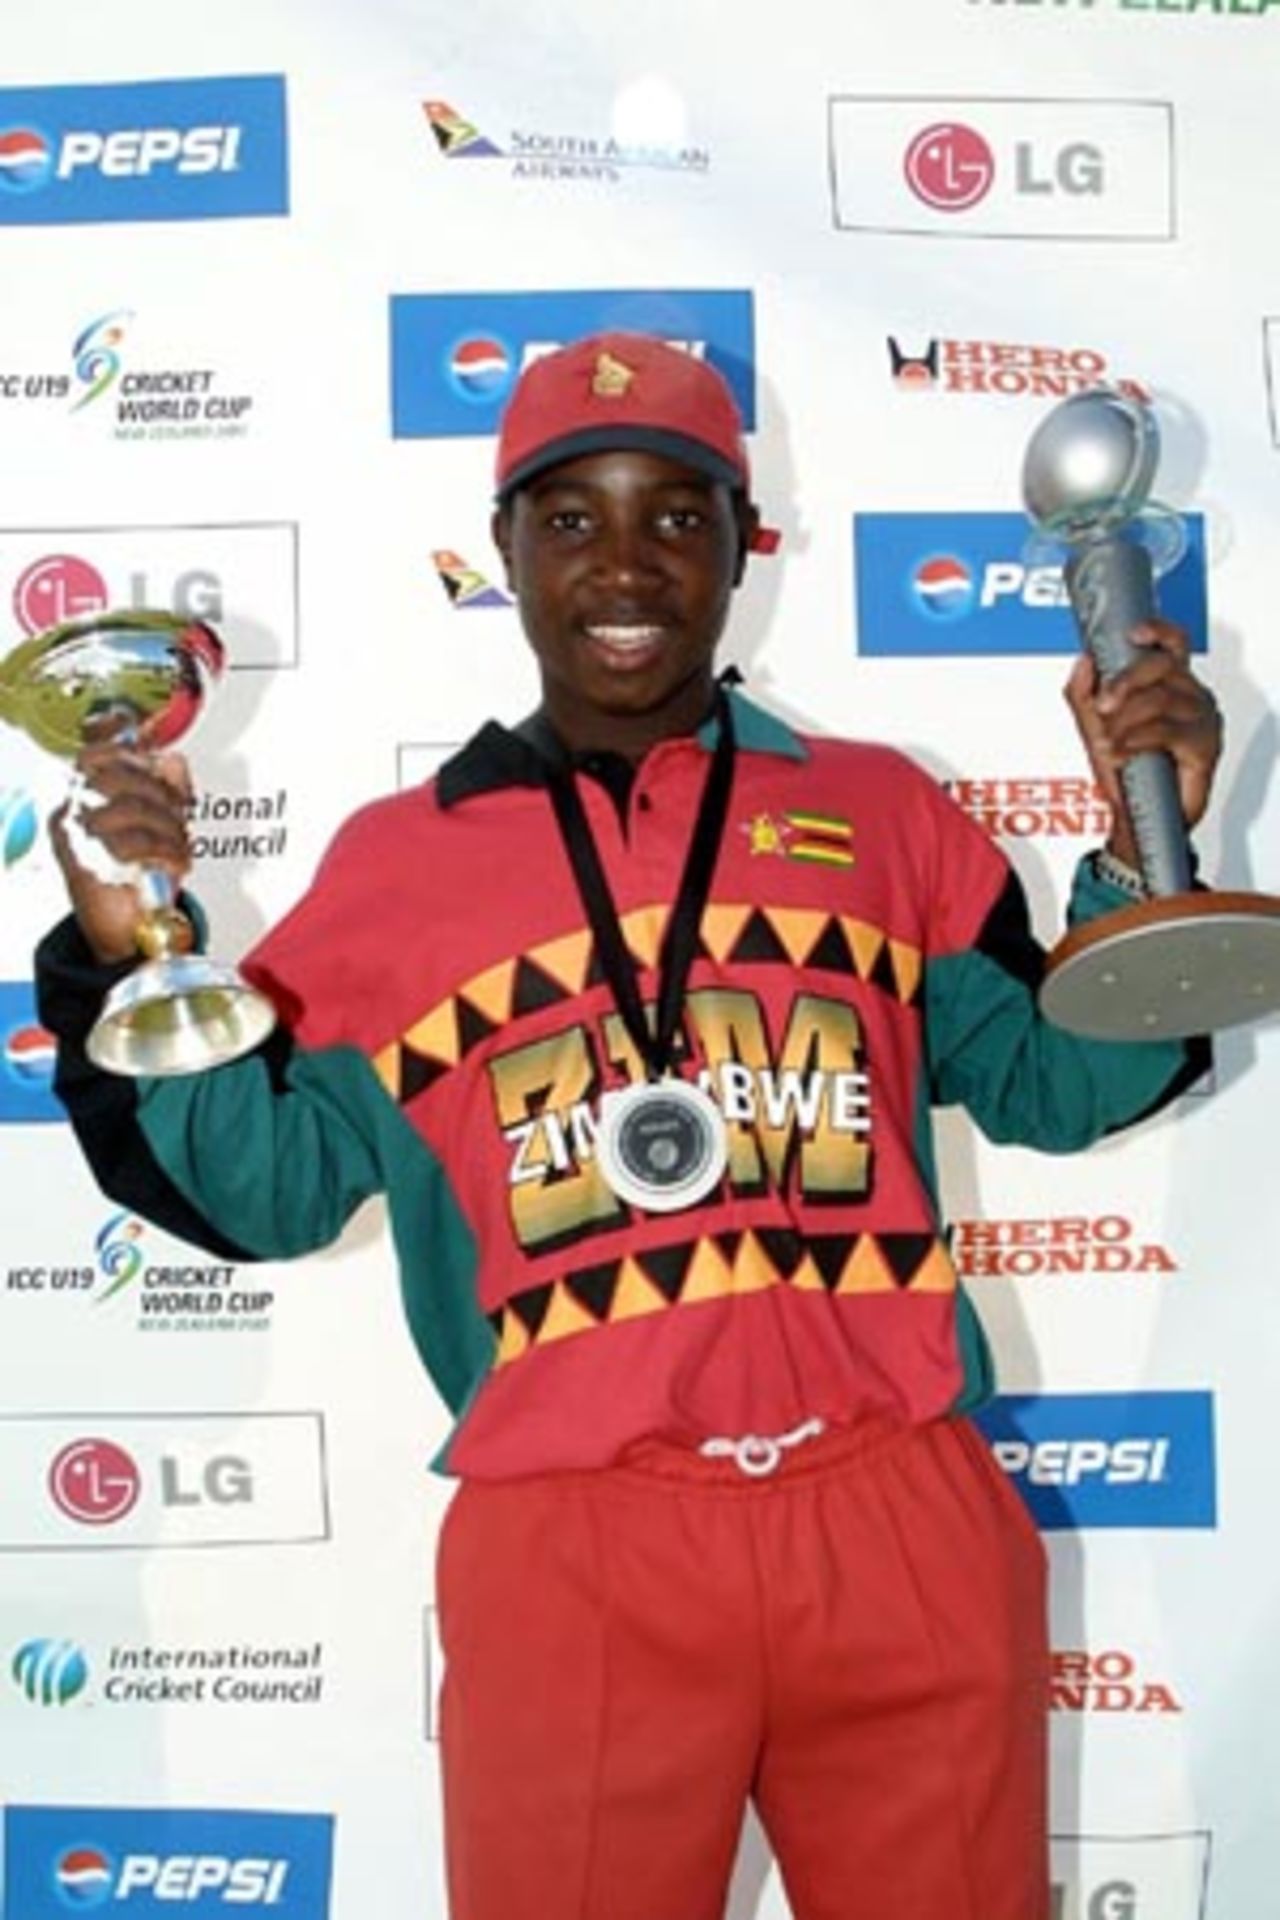 Zimbabwe Under-19 captain Tatenda Taibu celebrates being named Player of the Tournament and winning the Plate Championship with the two trophies. ICC Under-19 World Cup Plate Championship Final: Nepal Under-19s v Zimbabwe Under-19s at Lincoln No. 3, Lincoln, 8 February 2002.